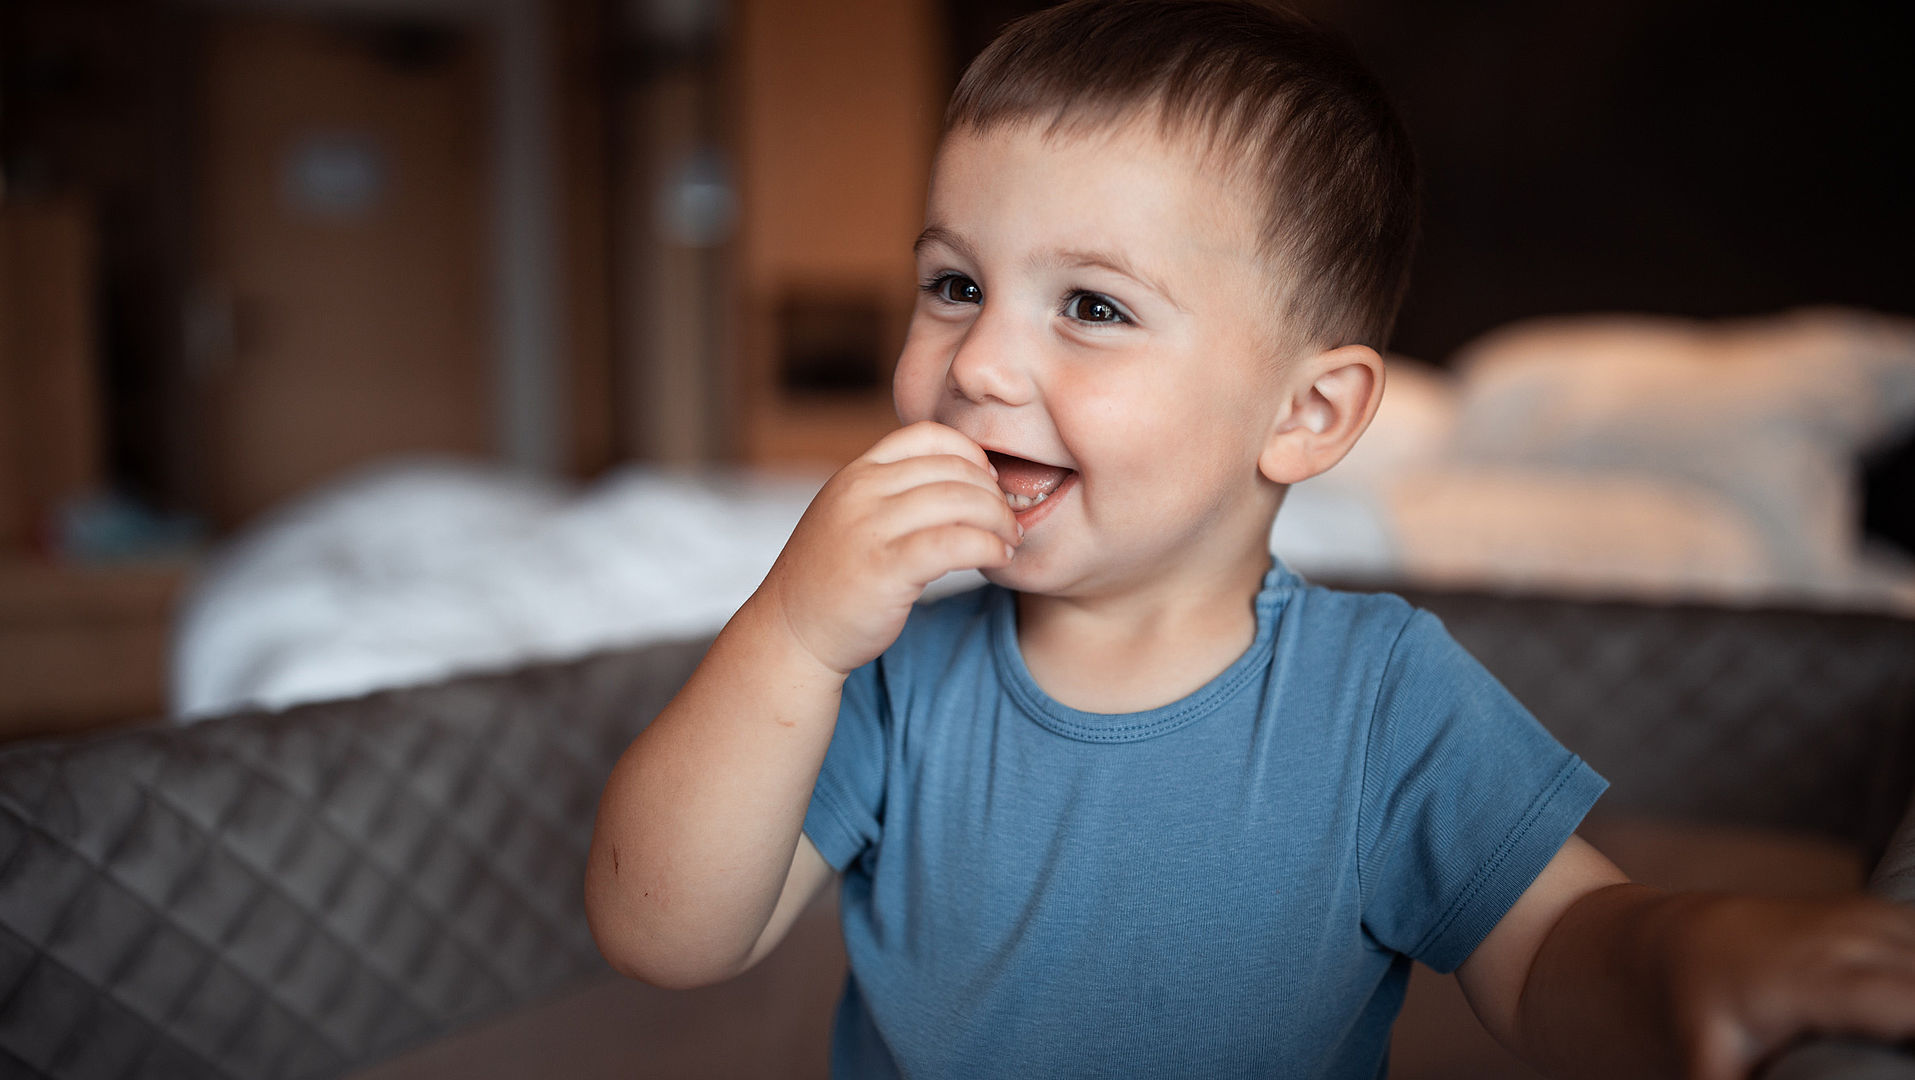 Toddler with blue T-shirt laughing in bed